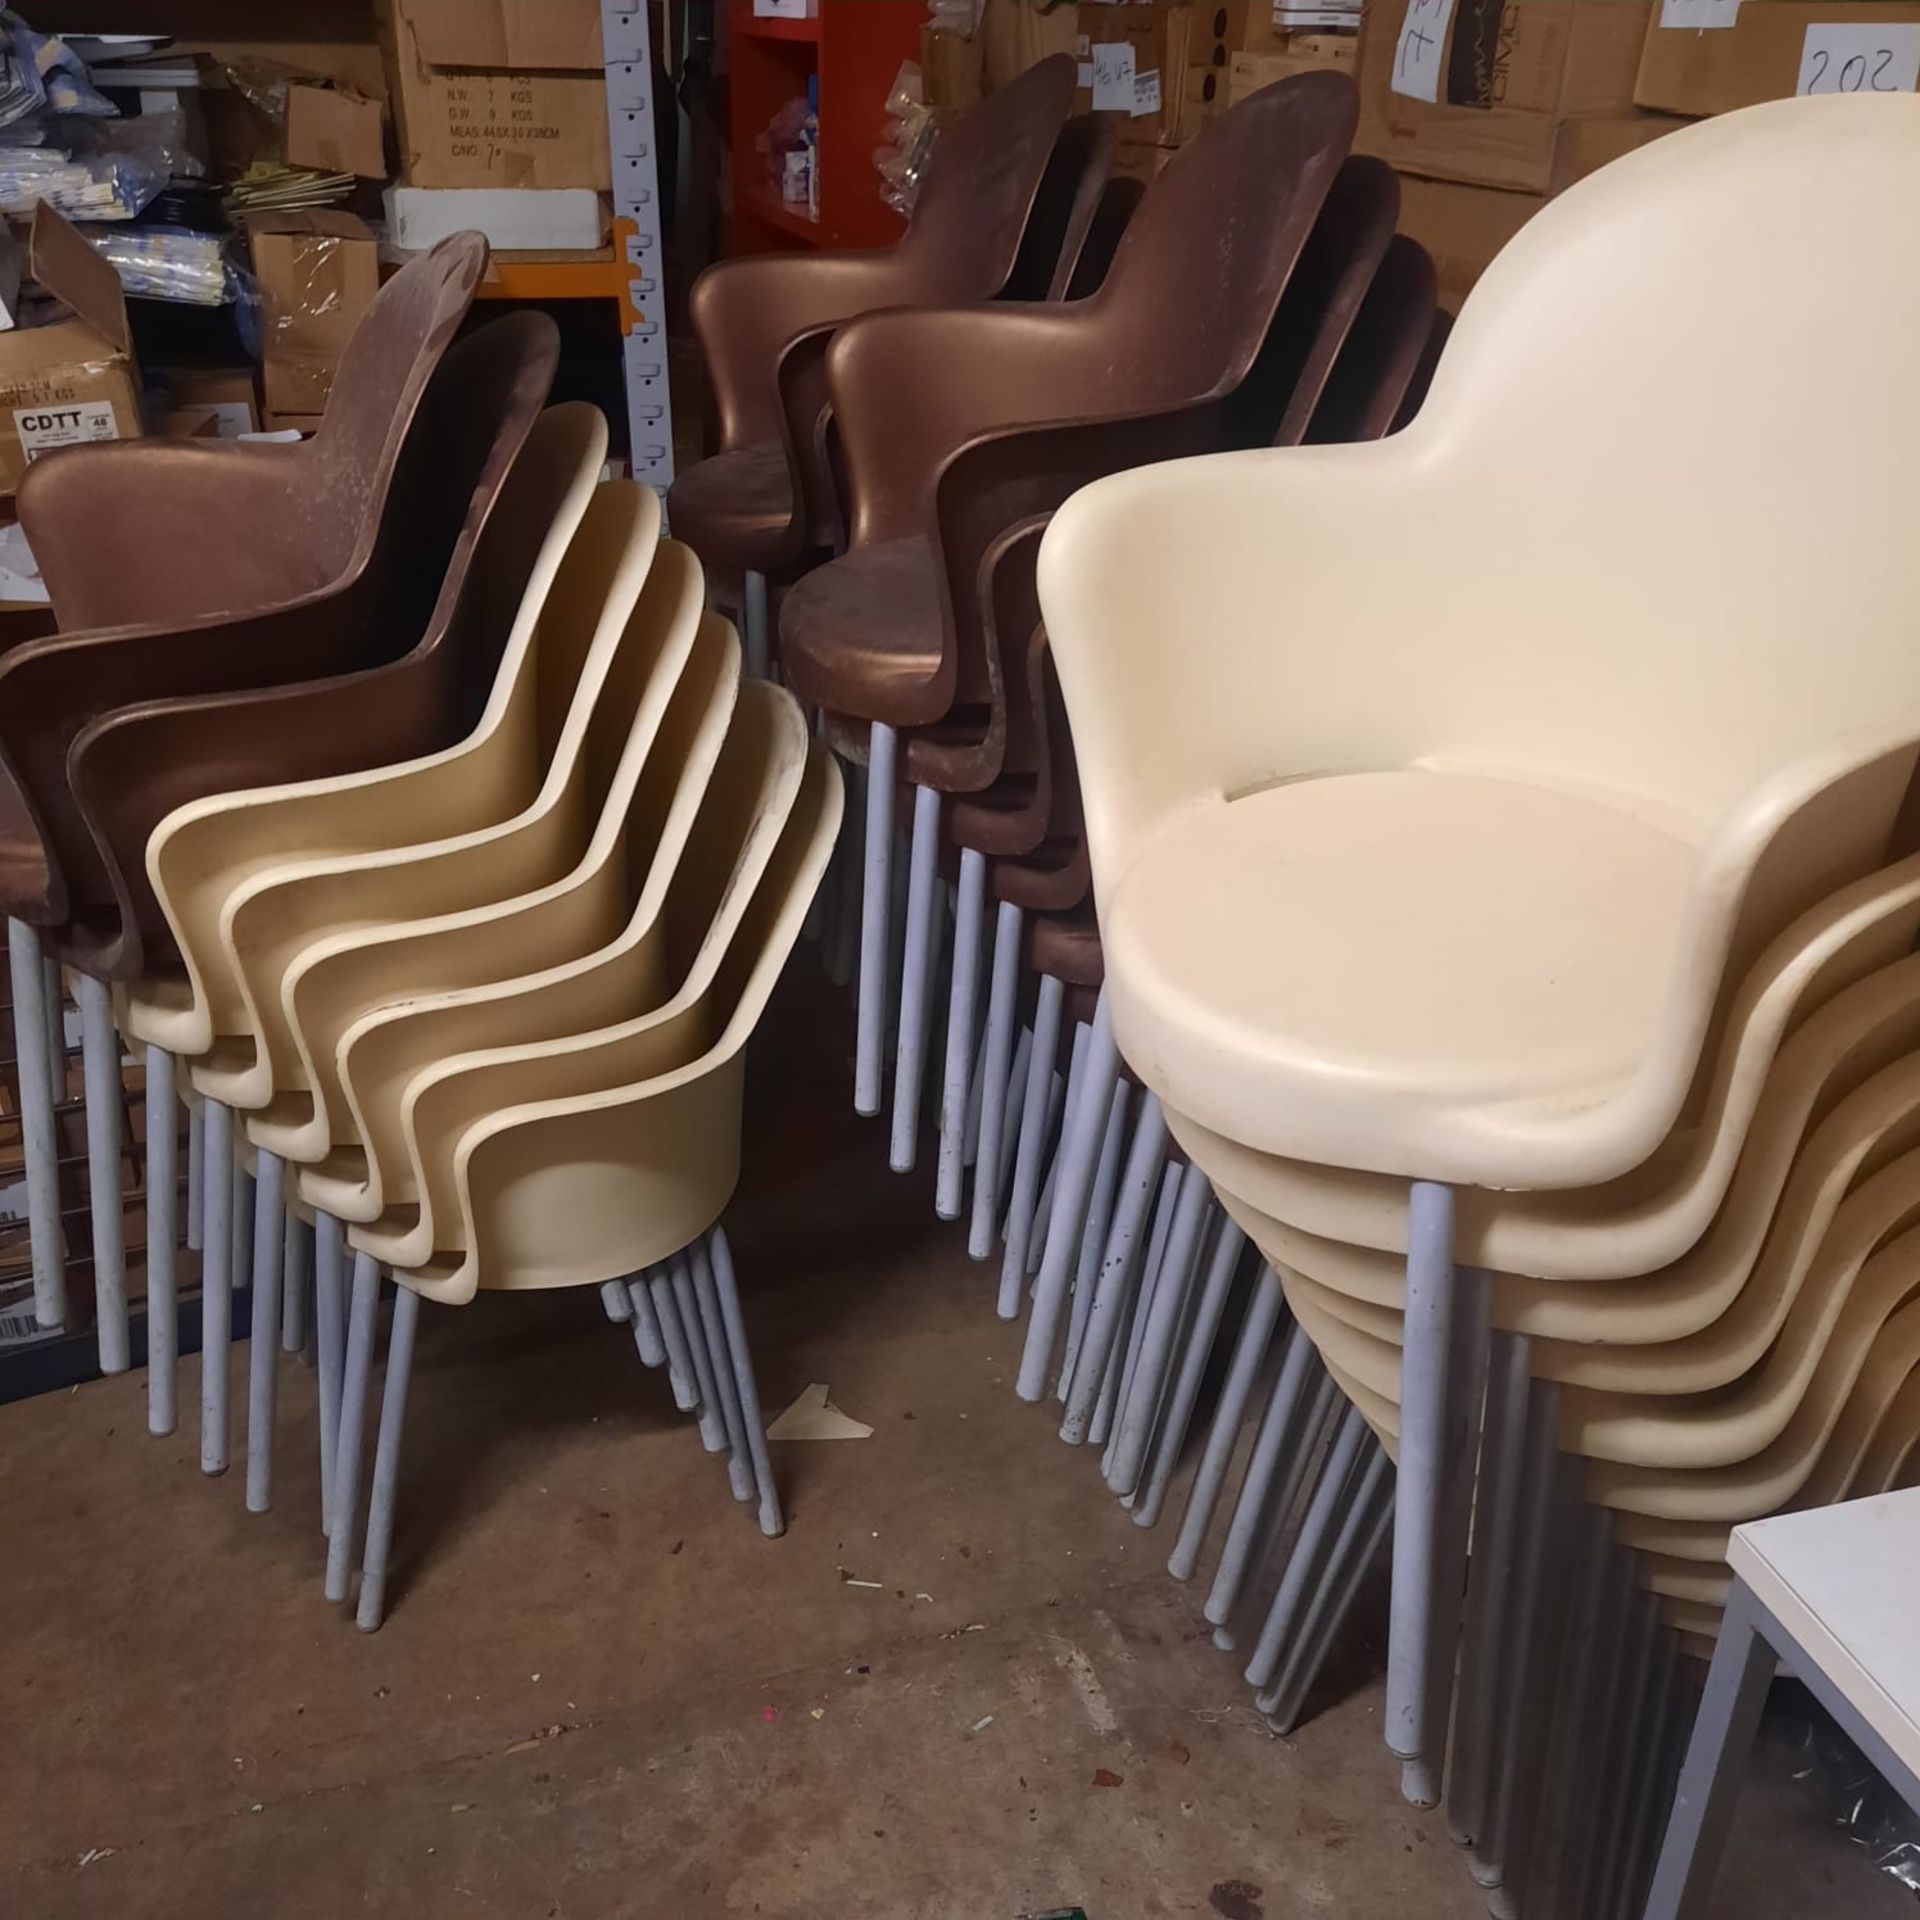 X 10 CREAM STABLE CHAIRS IDEAL FOR WEDDING & OTHER ALL OCCASSIONS - SALEROOM AT THE BACK.